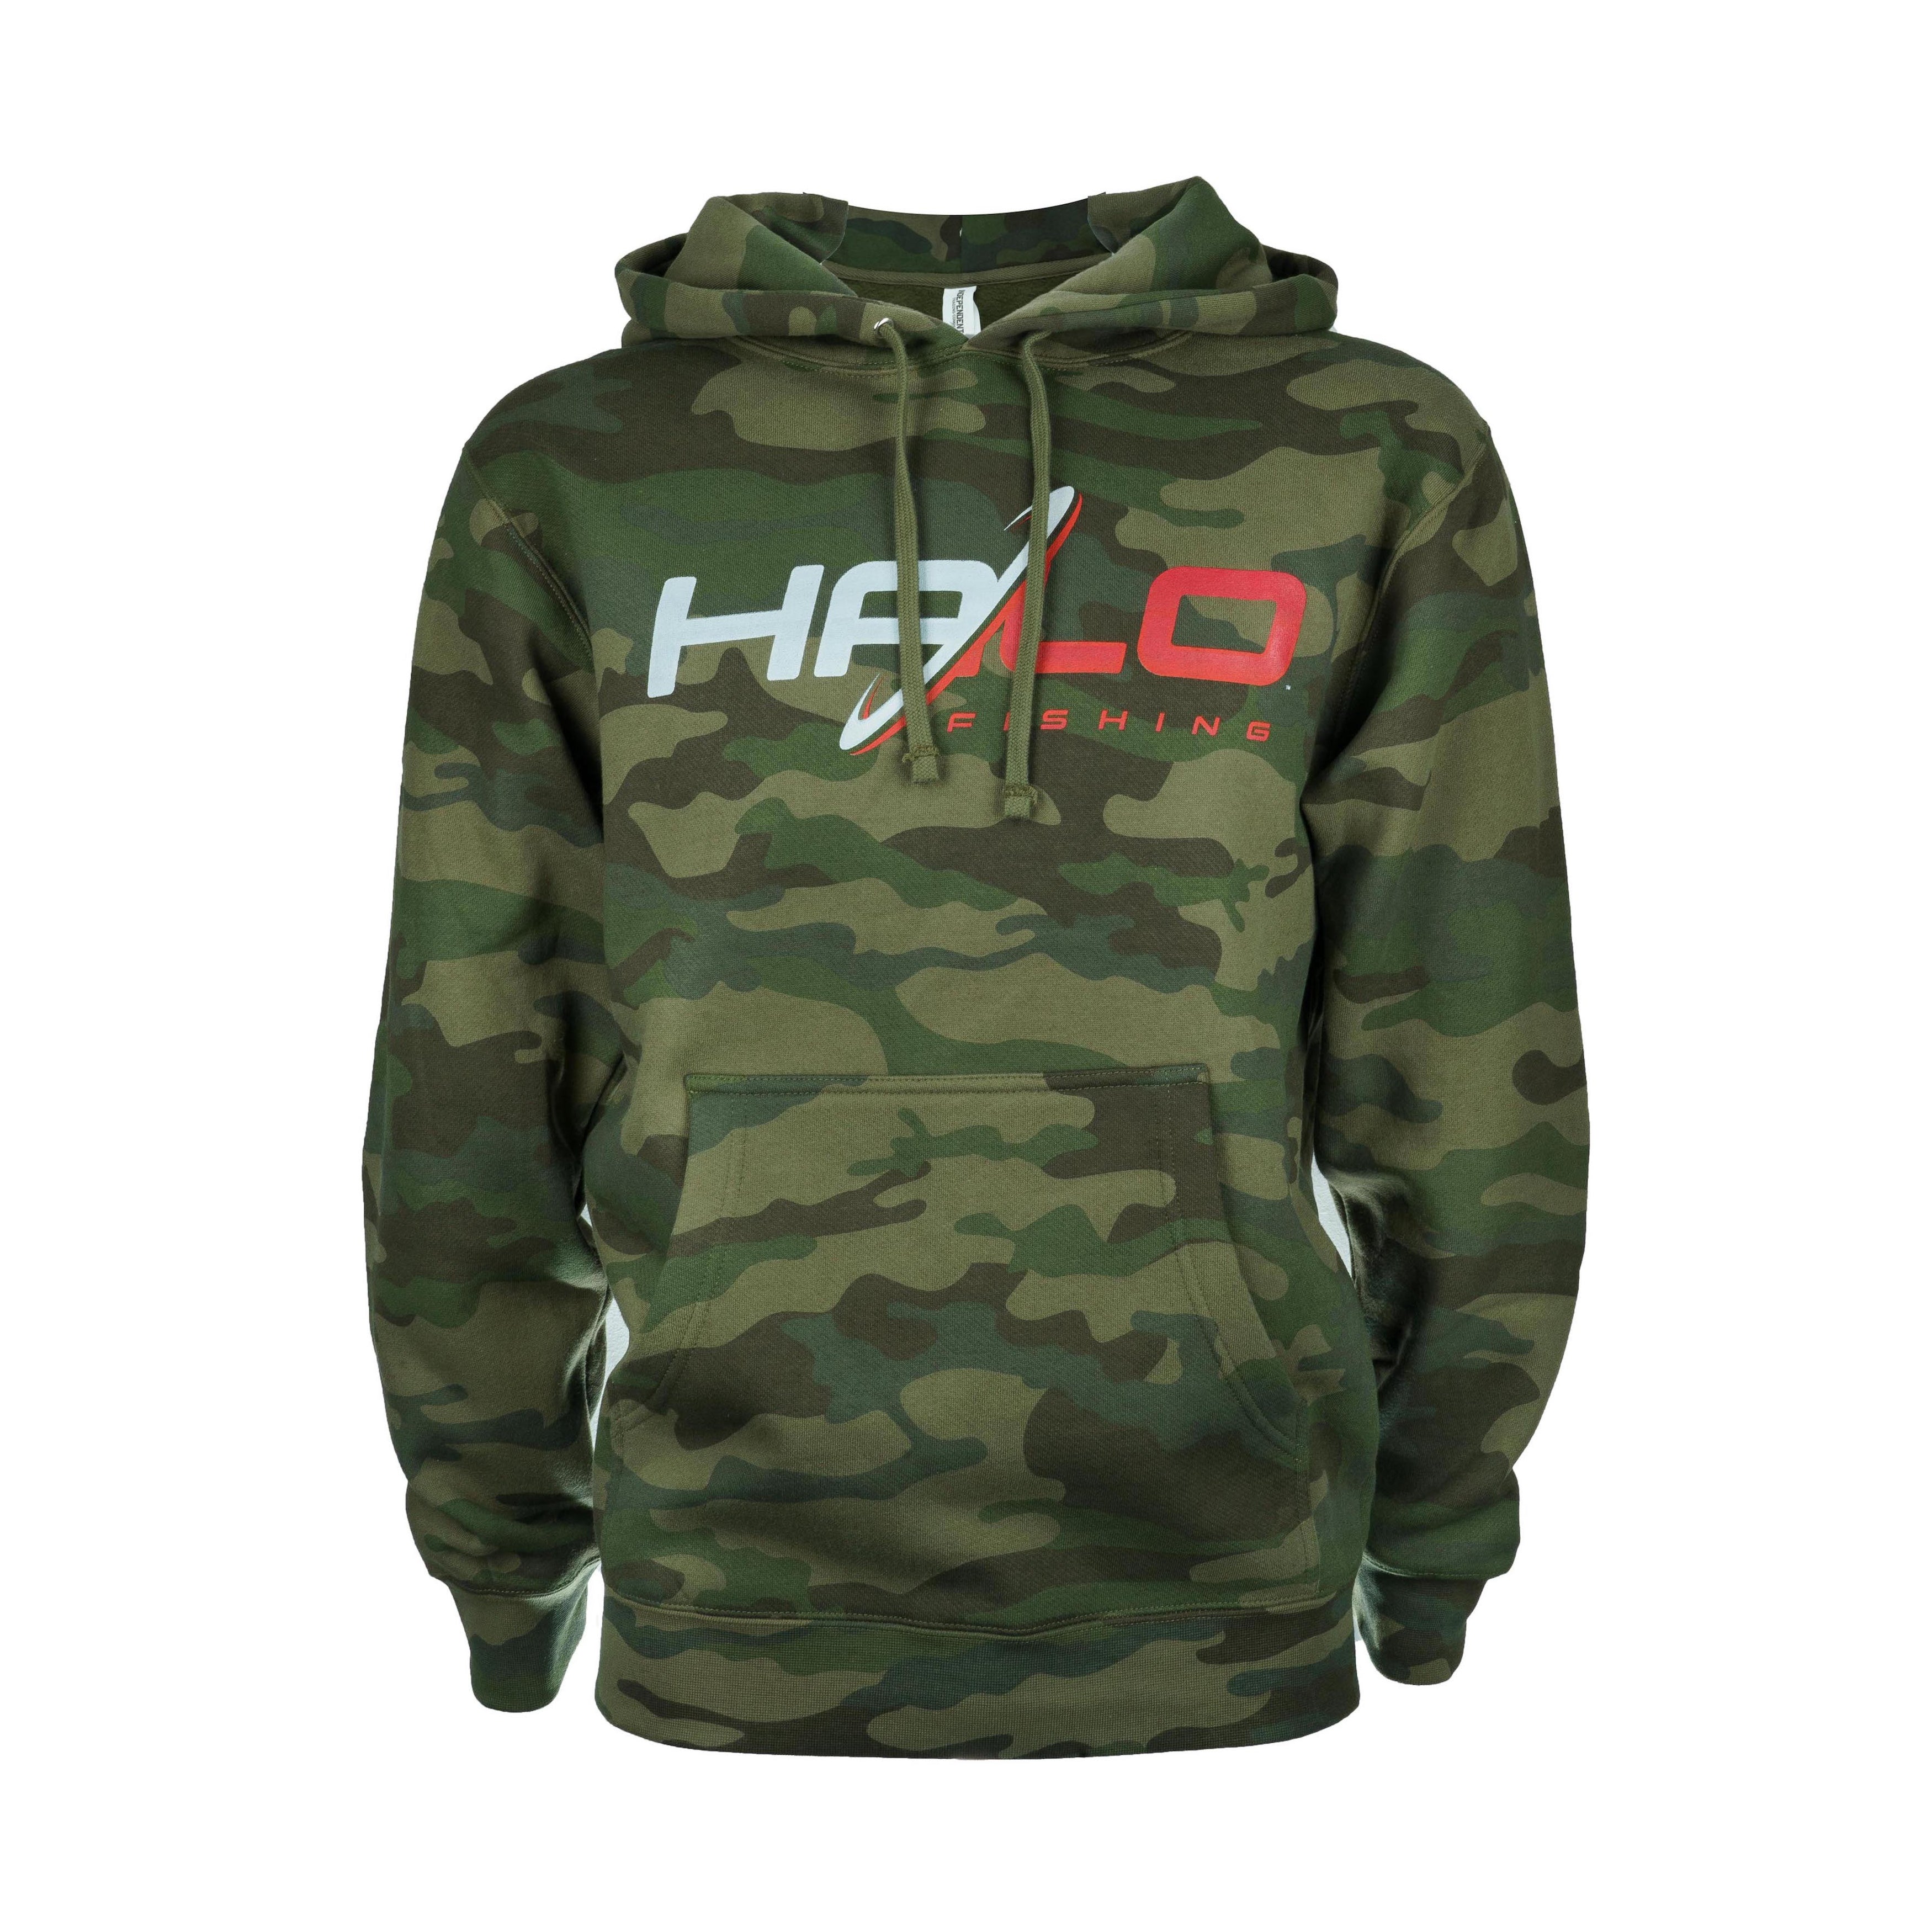 Halo Fishing Hoodie Forest Camo 2XL